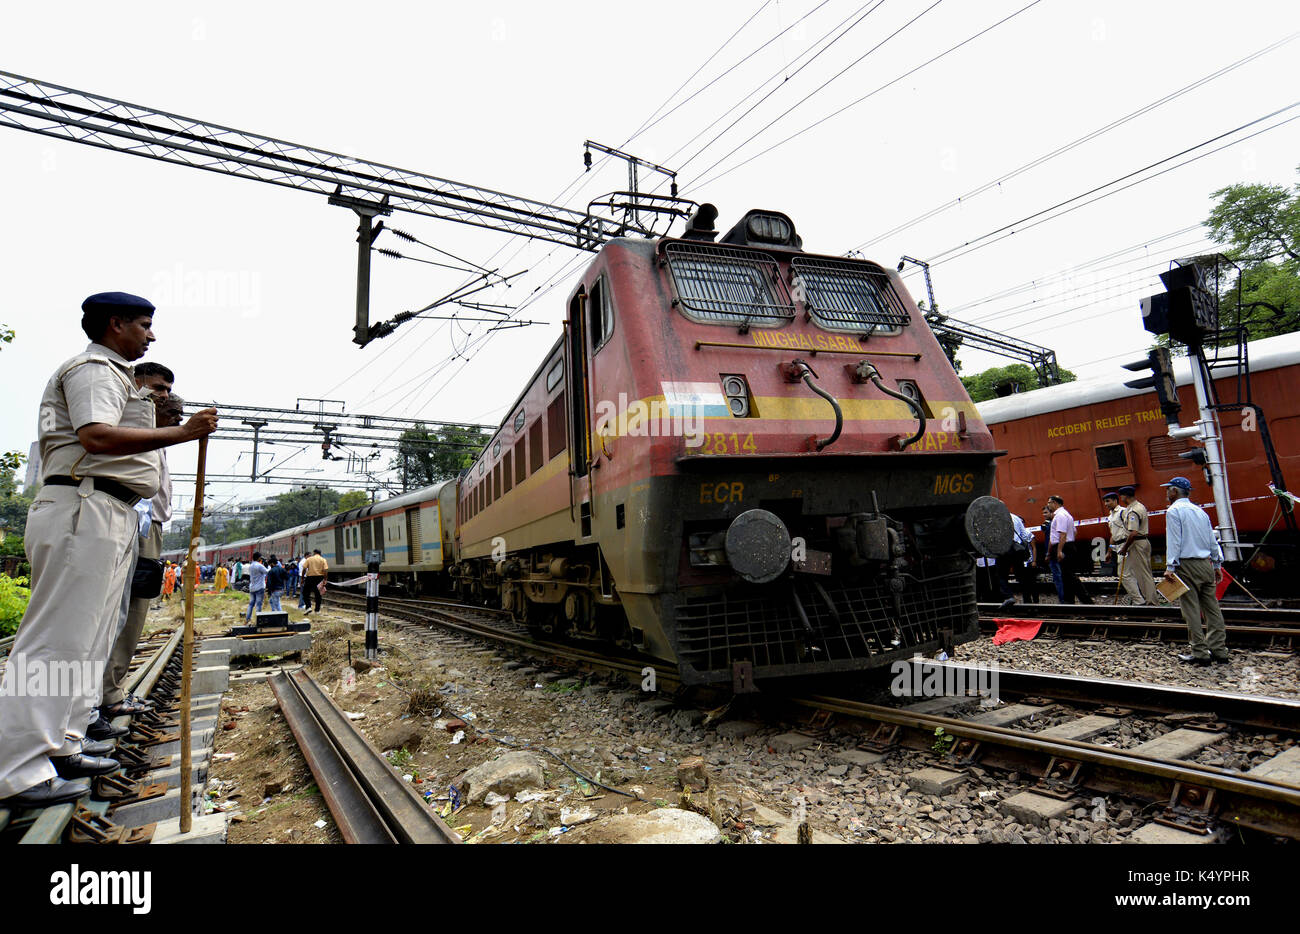 New Delhi. 7th Sep, 2017. Photo taken on Sept. 7, 2017 shows a train accident site in New Delhi, India. A high-speed passenger train derailed in the Indian capital Thursday, railway officials said. The derailment of Delhi-bound Rajdhani Express from the eastern city of Ranchi took place around 12:00 p.m. local time, causing no casualties. Credit: stringer/Xinhua/Alamy Live News Stock Photo